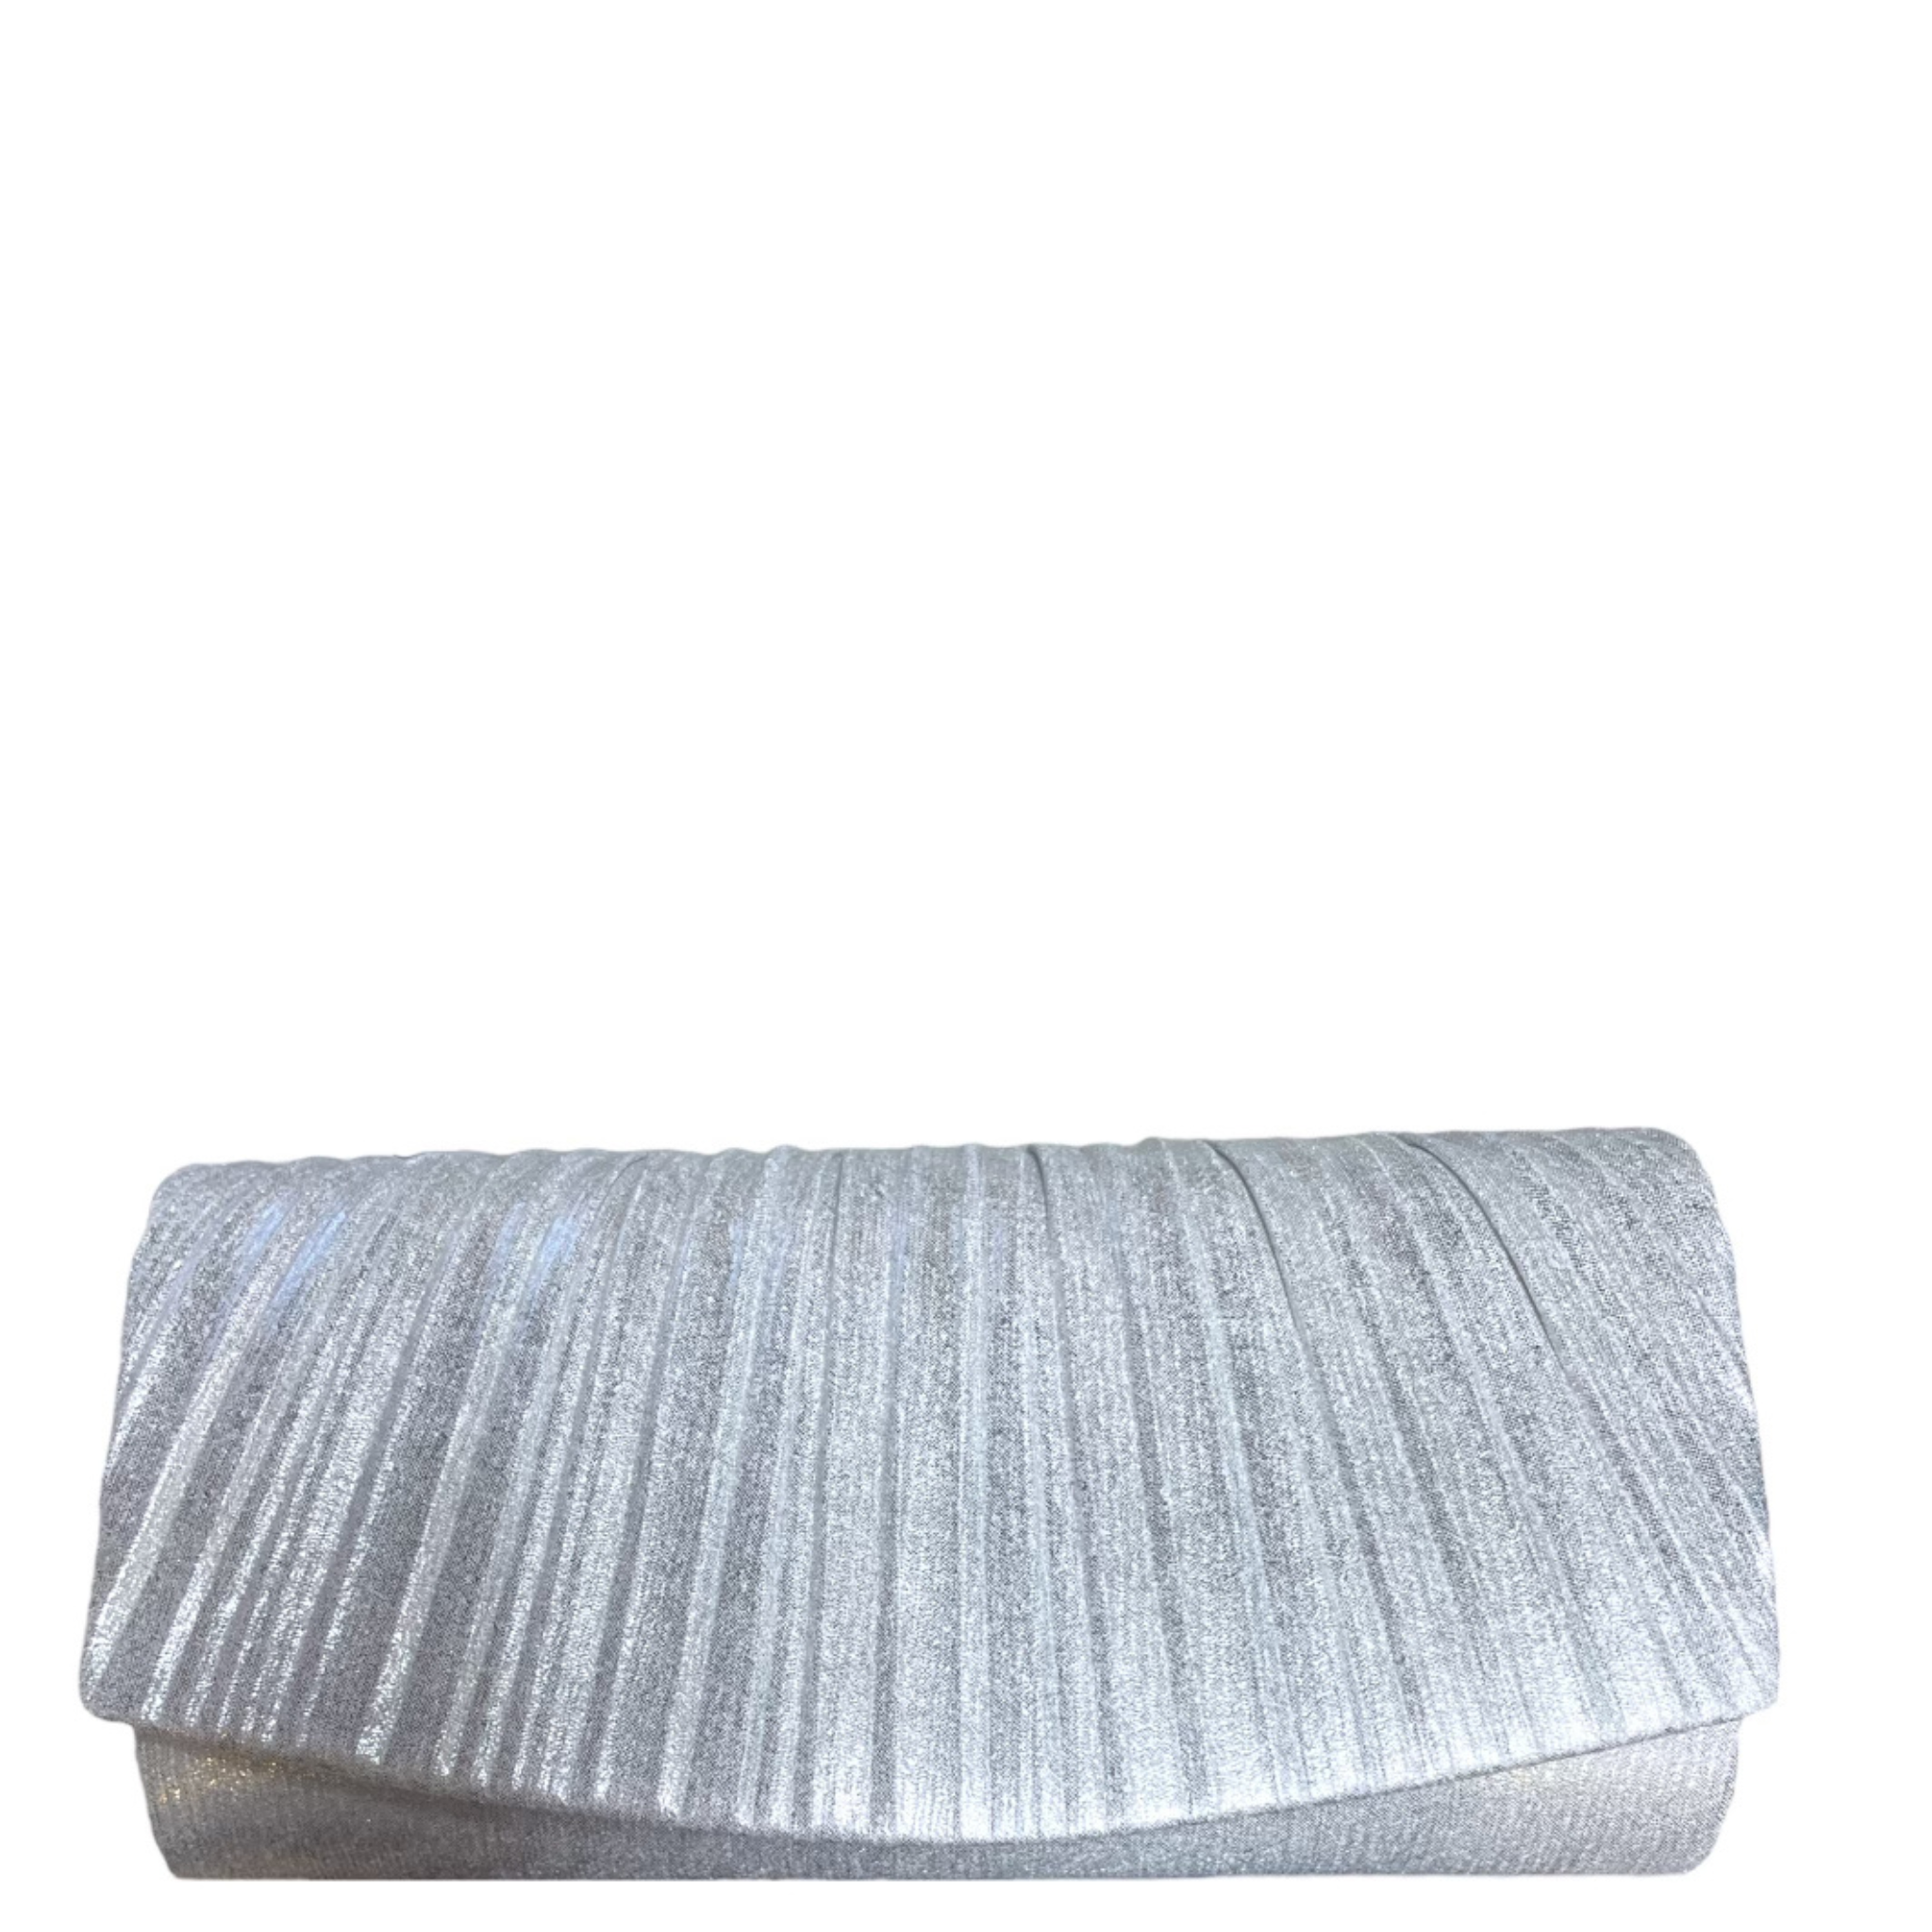 Pleated Evening Clutch Bag